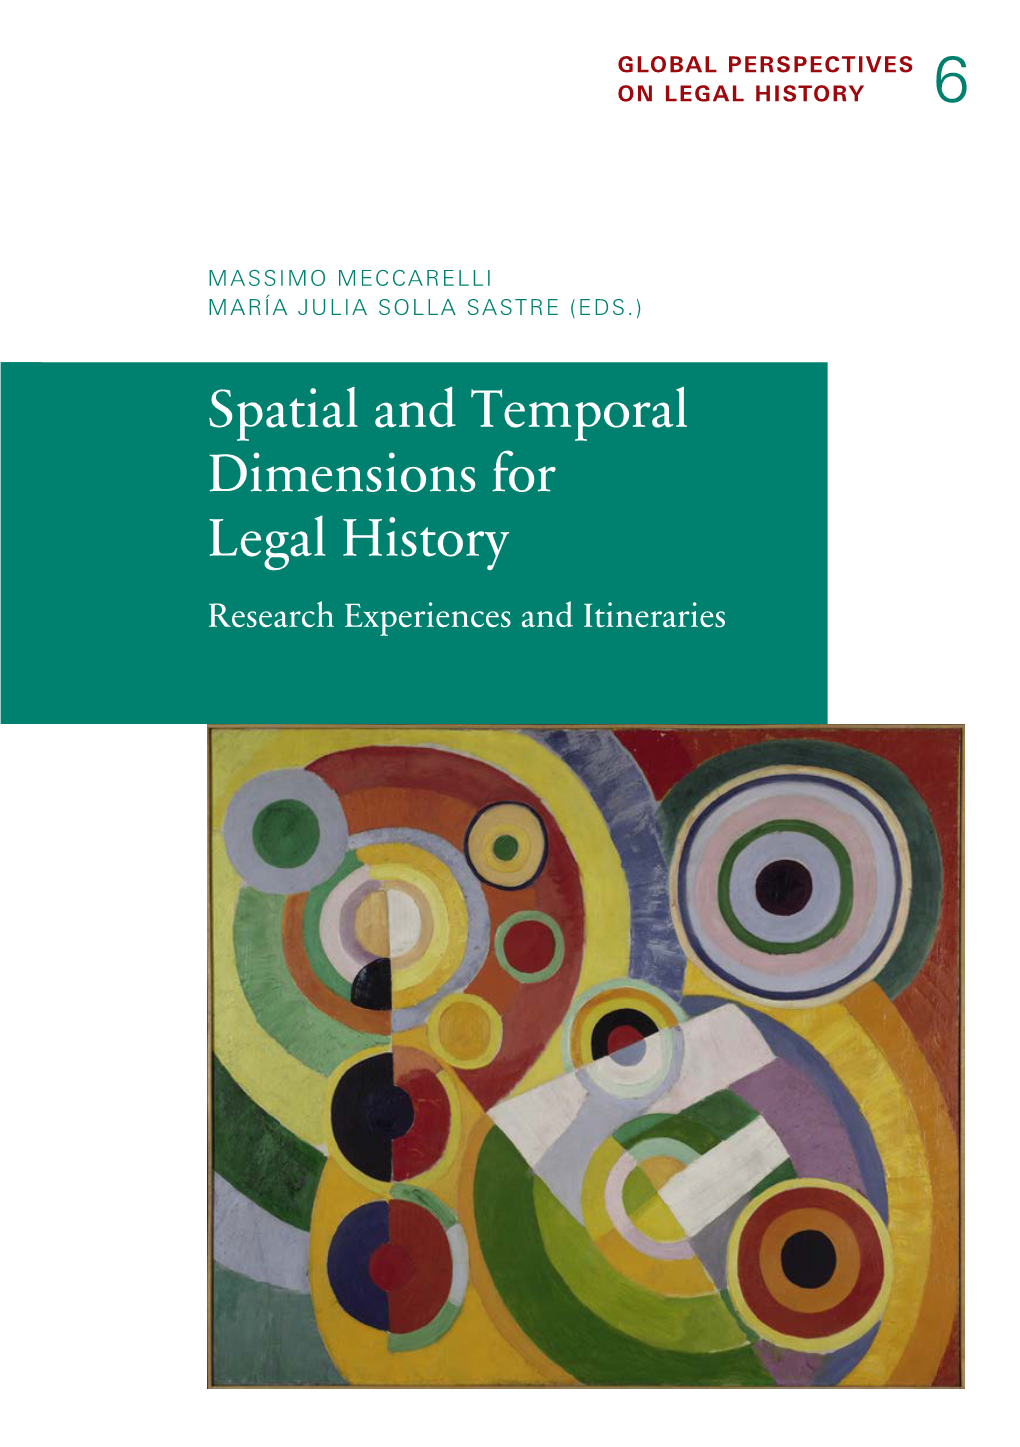 Spatial and Temporal Dimensions for Legal History. Research